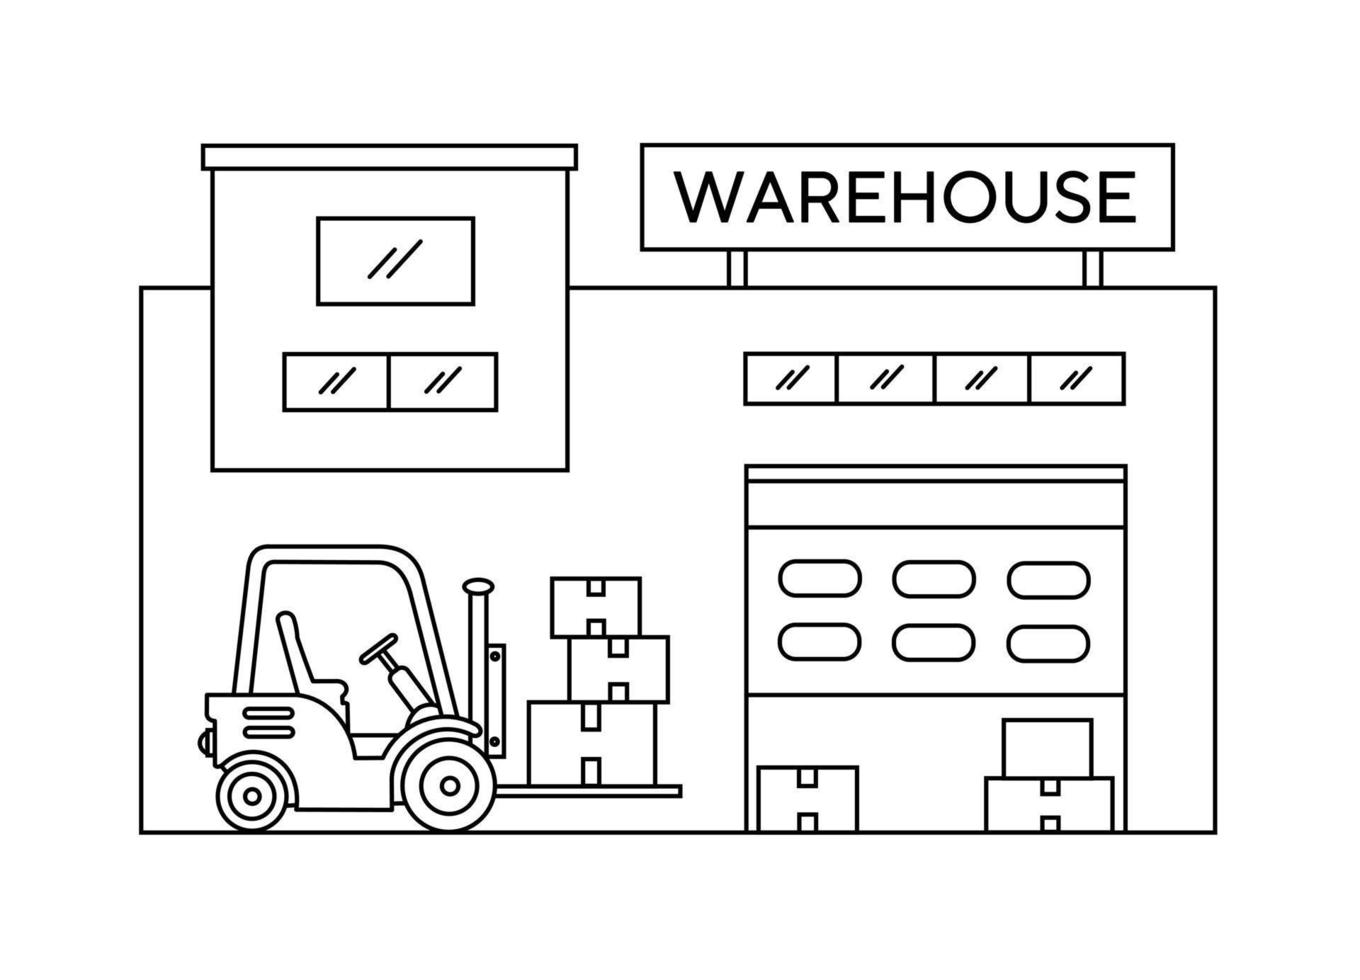 Warehouse building. The loader carries the goods to the warehouse. Logistics and delivery. Storage room. Linear vector illustration, icon.